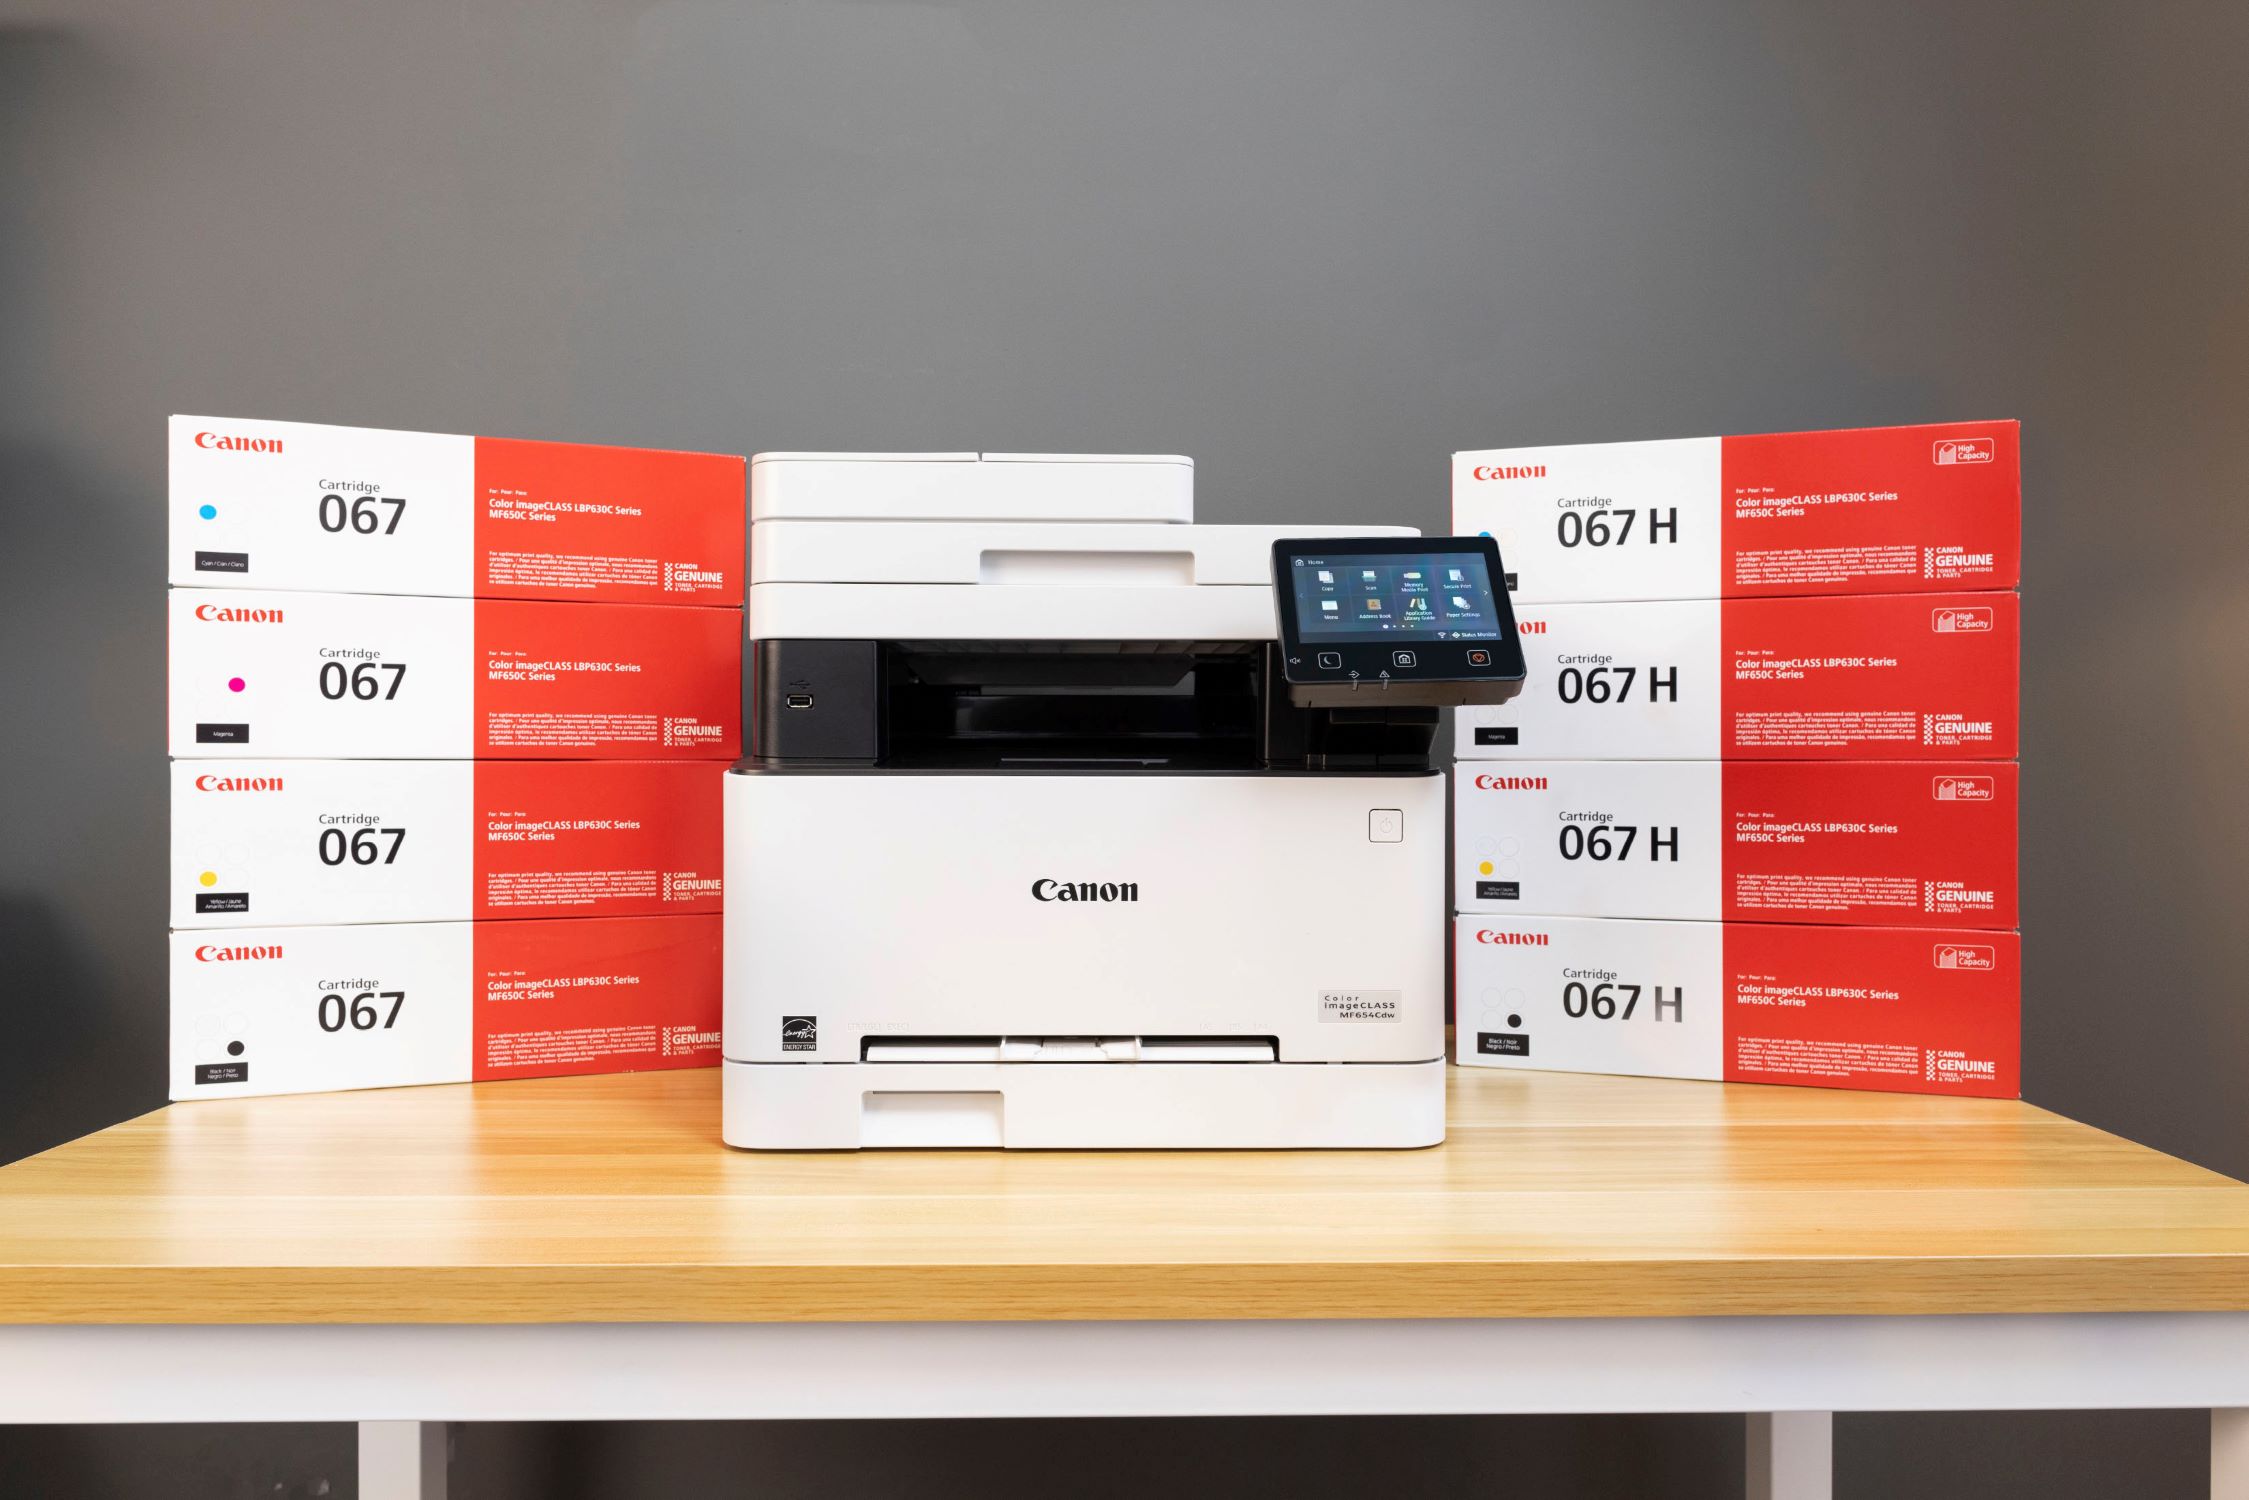 How To Print From Android Phone To Canon Printer